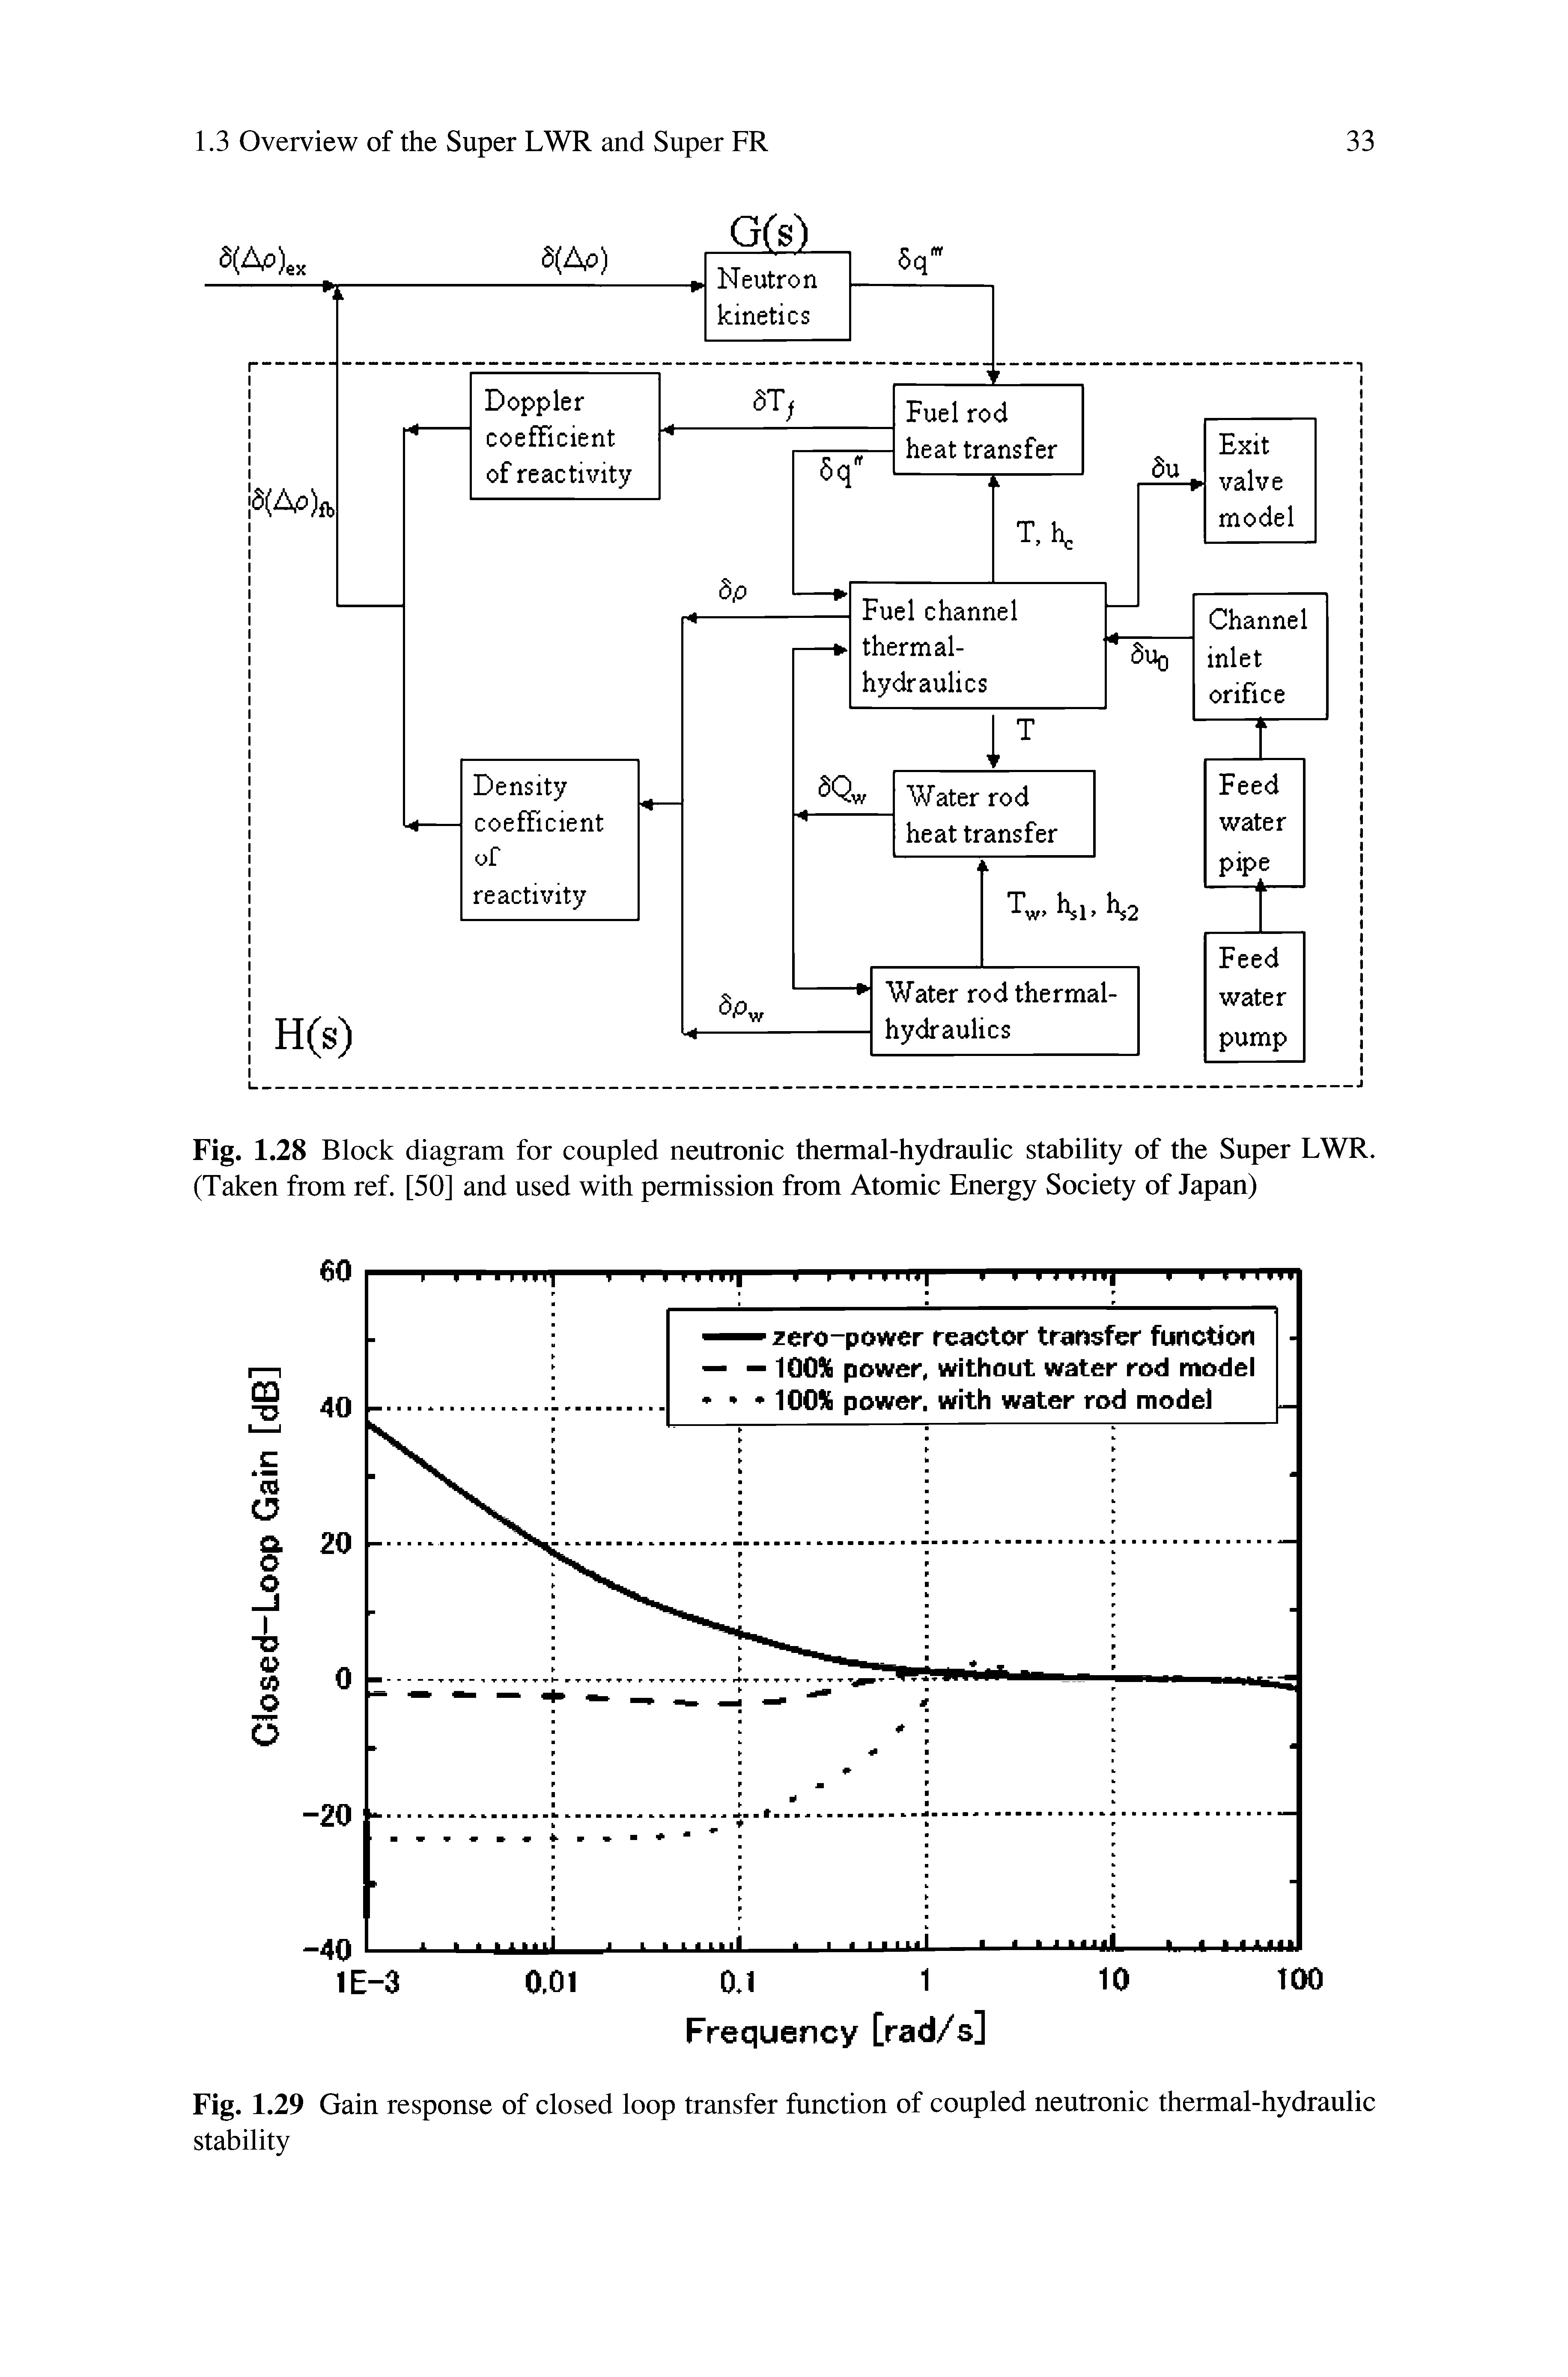 Fig. 1.28 Block diagram for coupled neutronic thermal-hydraulic stability of the Super LWR. (Taken from ref. [50] and used with permission from Atomic Energy Society of Japan)...